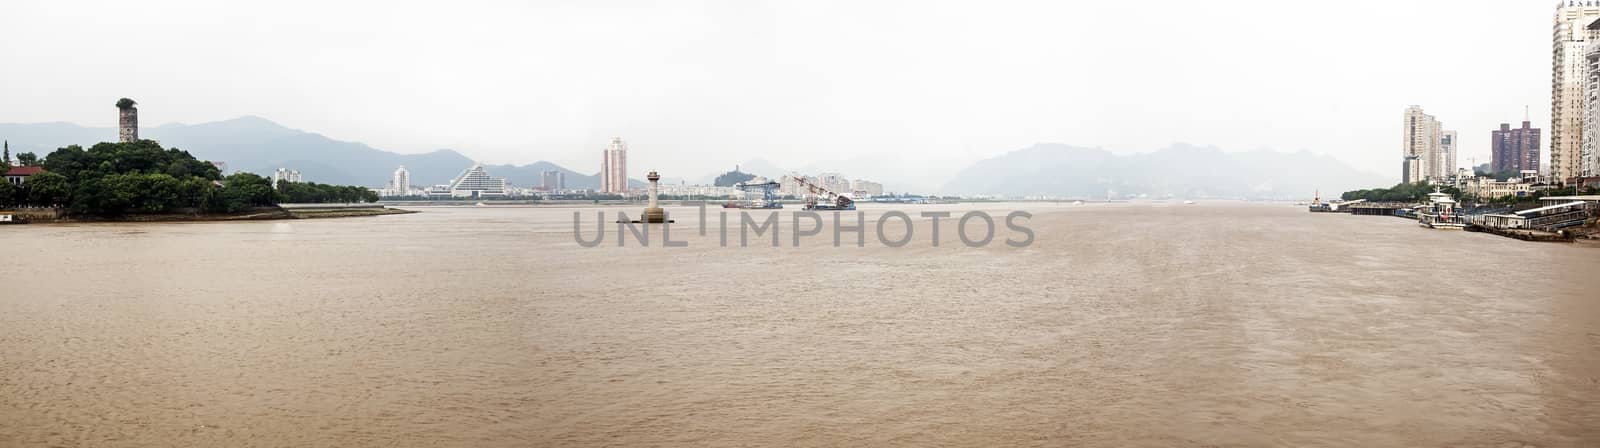 Shooting in China Zhejiang Wenzhou (Wenzhou city on the right bank)